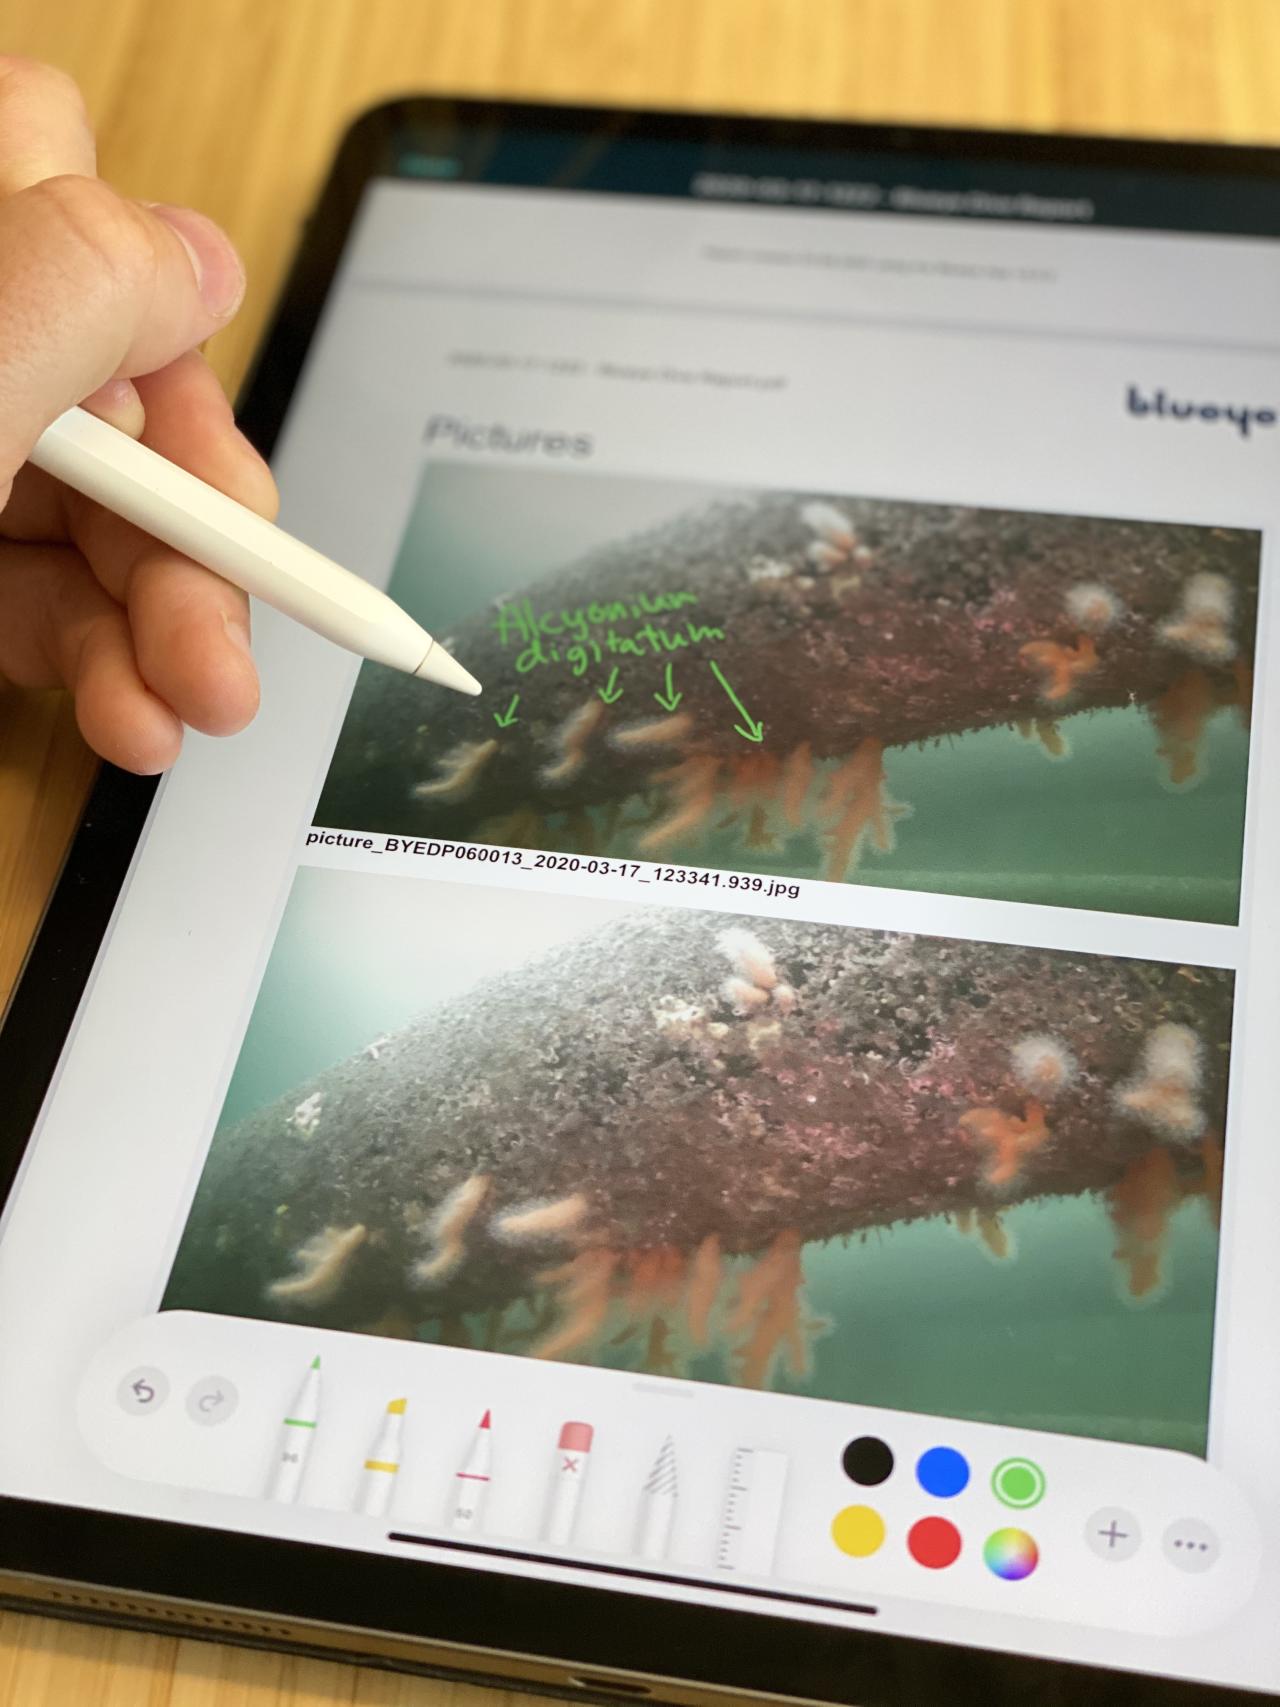 Annotating an inspection report using the Apple Pencil